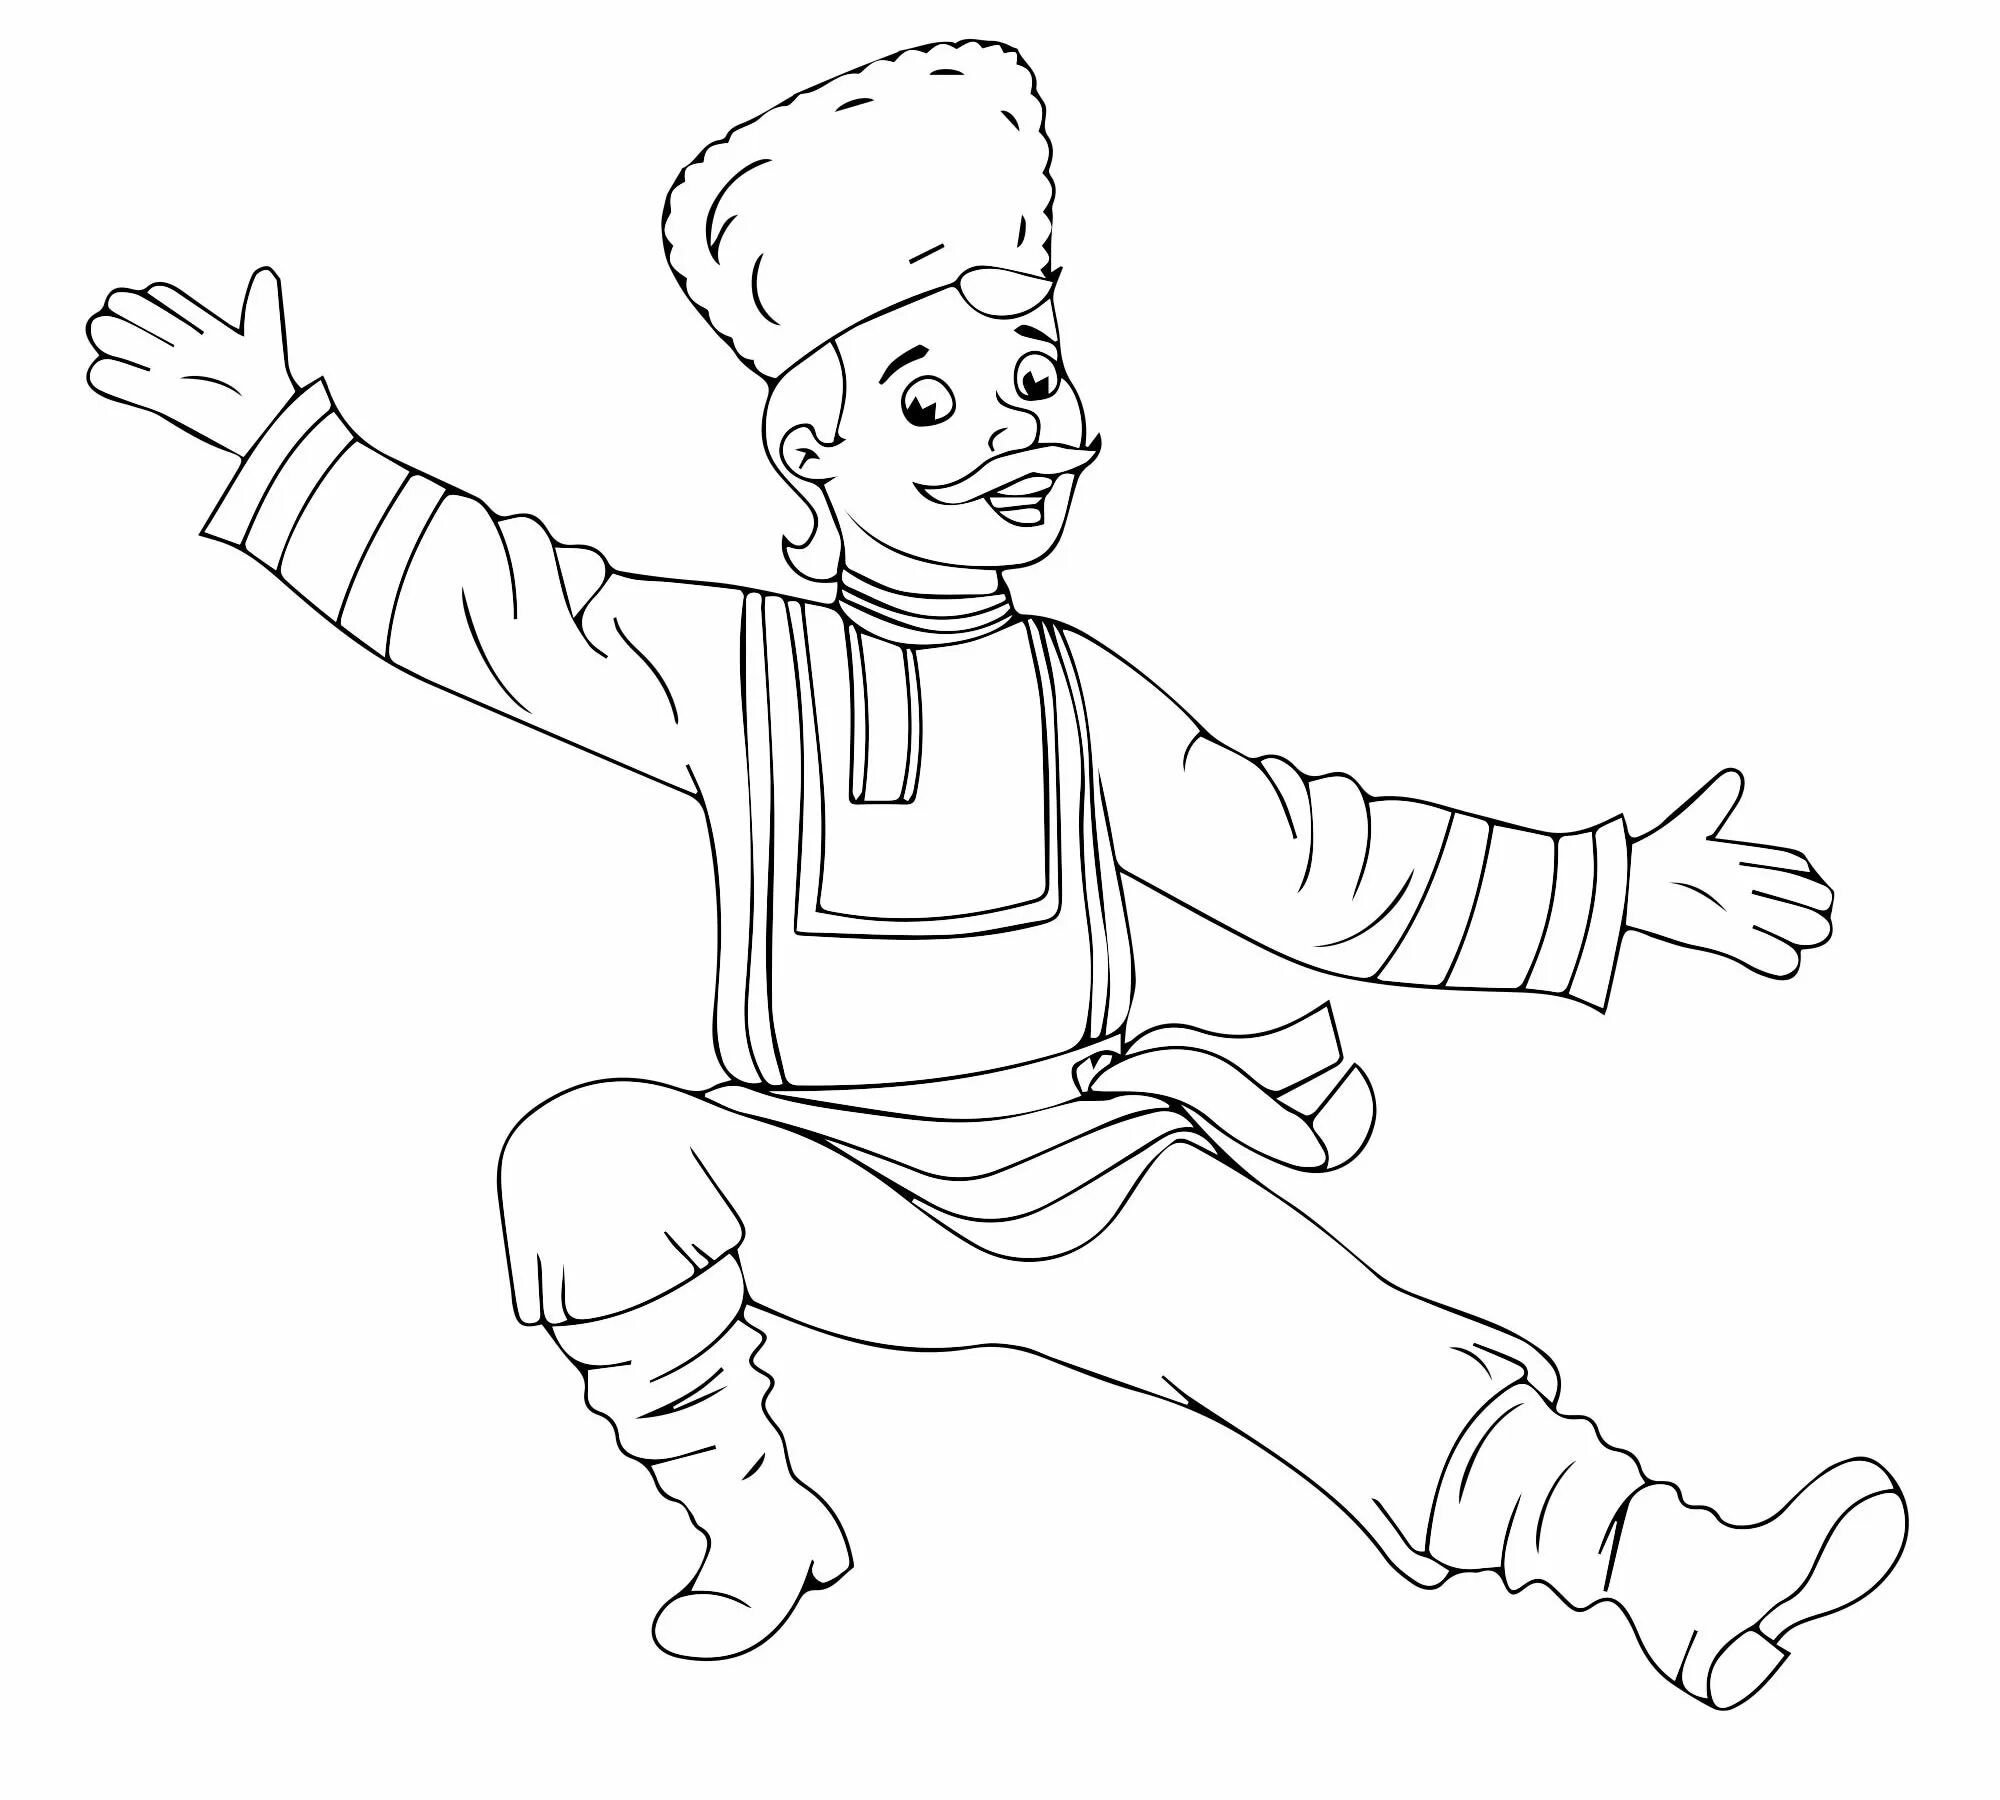 Animated Cossack costume coloring book